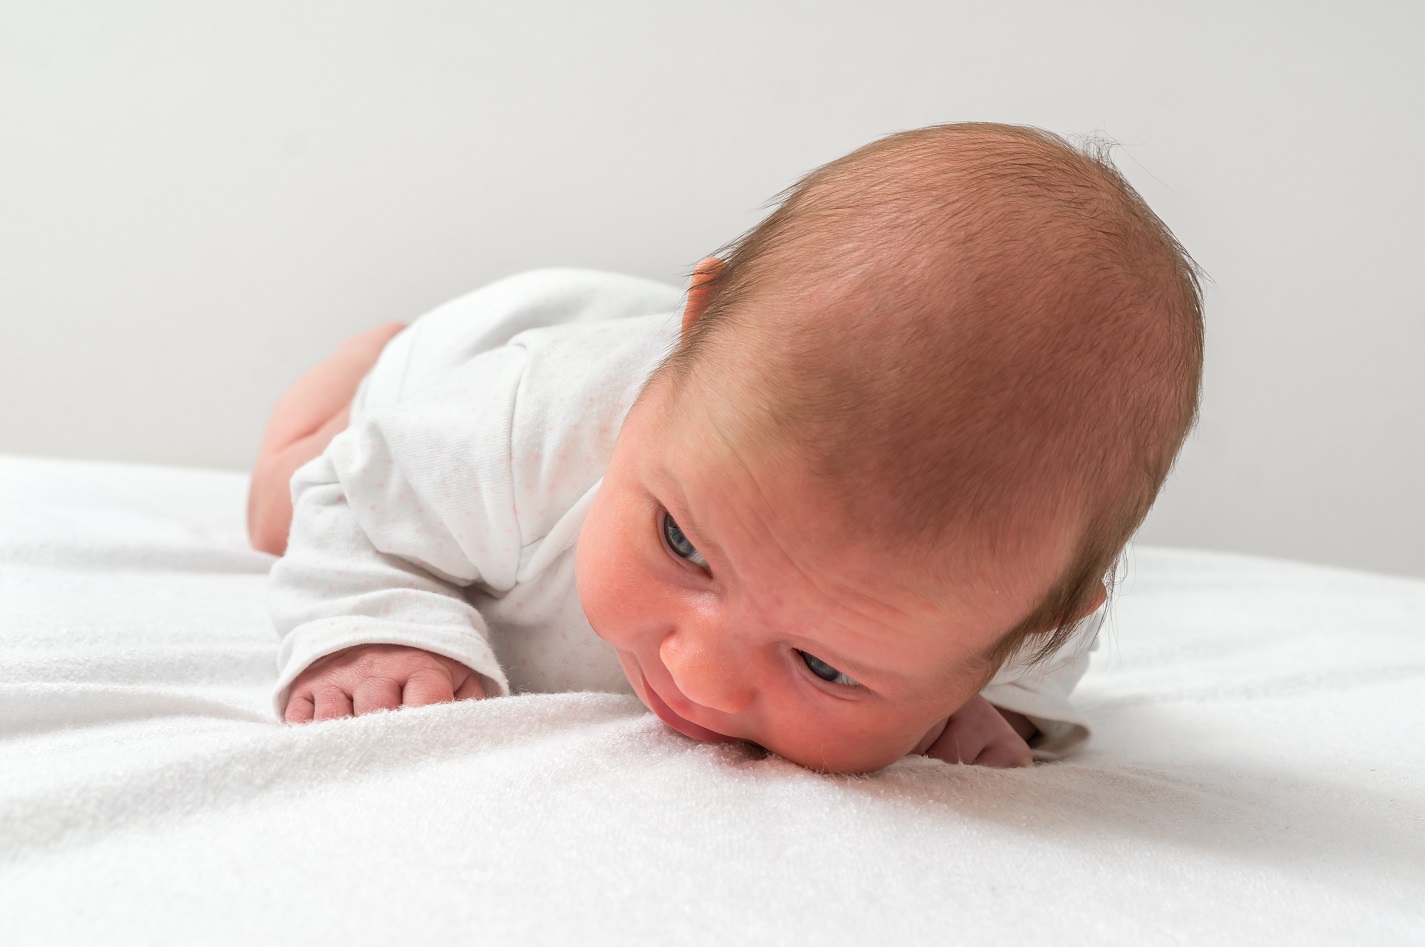 The “Whys” of Baby Hiccups - The Pulse